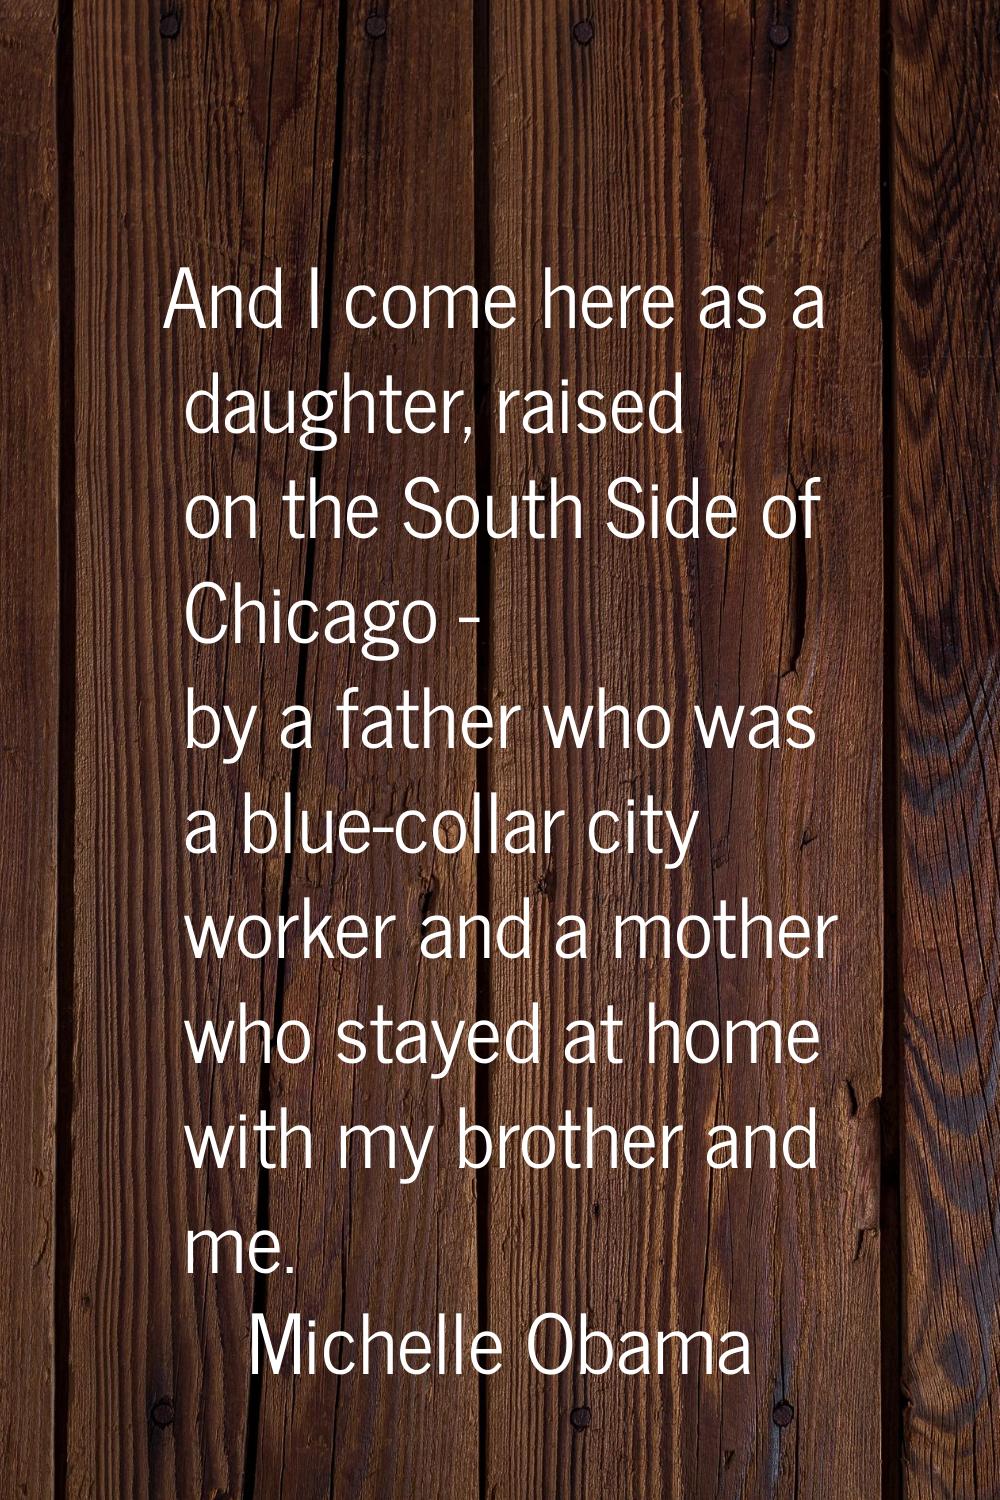 And I come here as a daughter, raised on the South Side of Chicago - by a father who was a blue-col